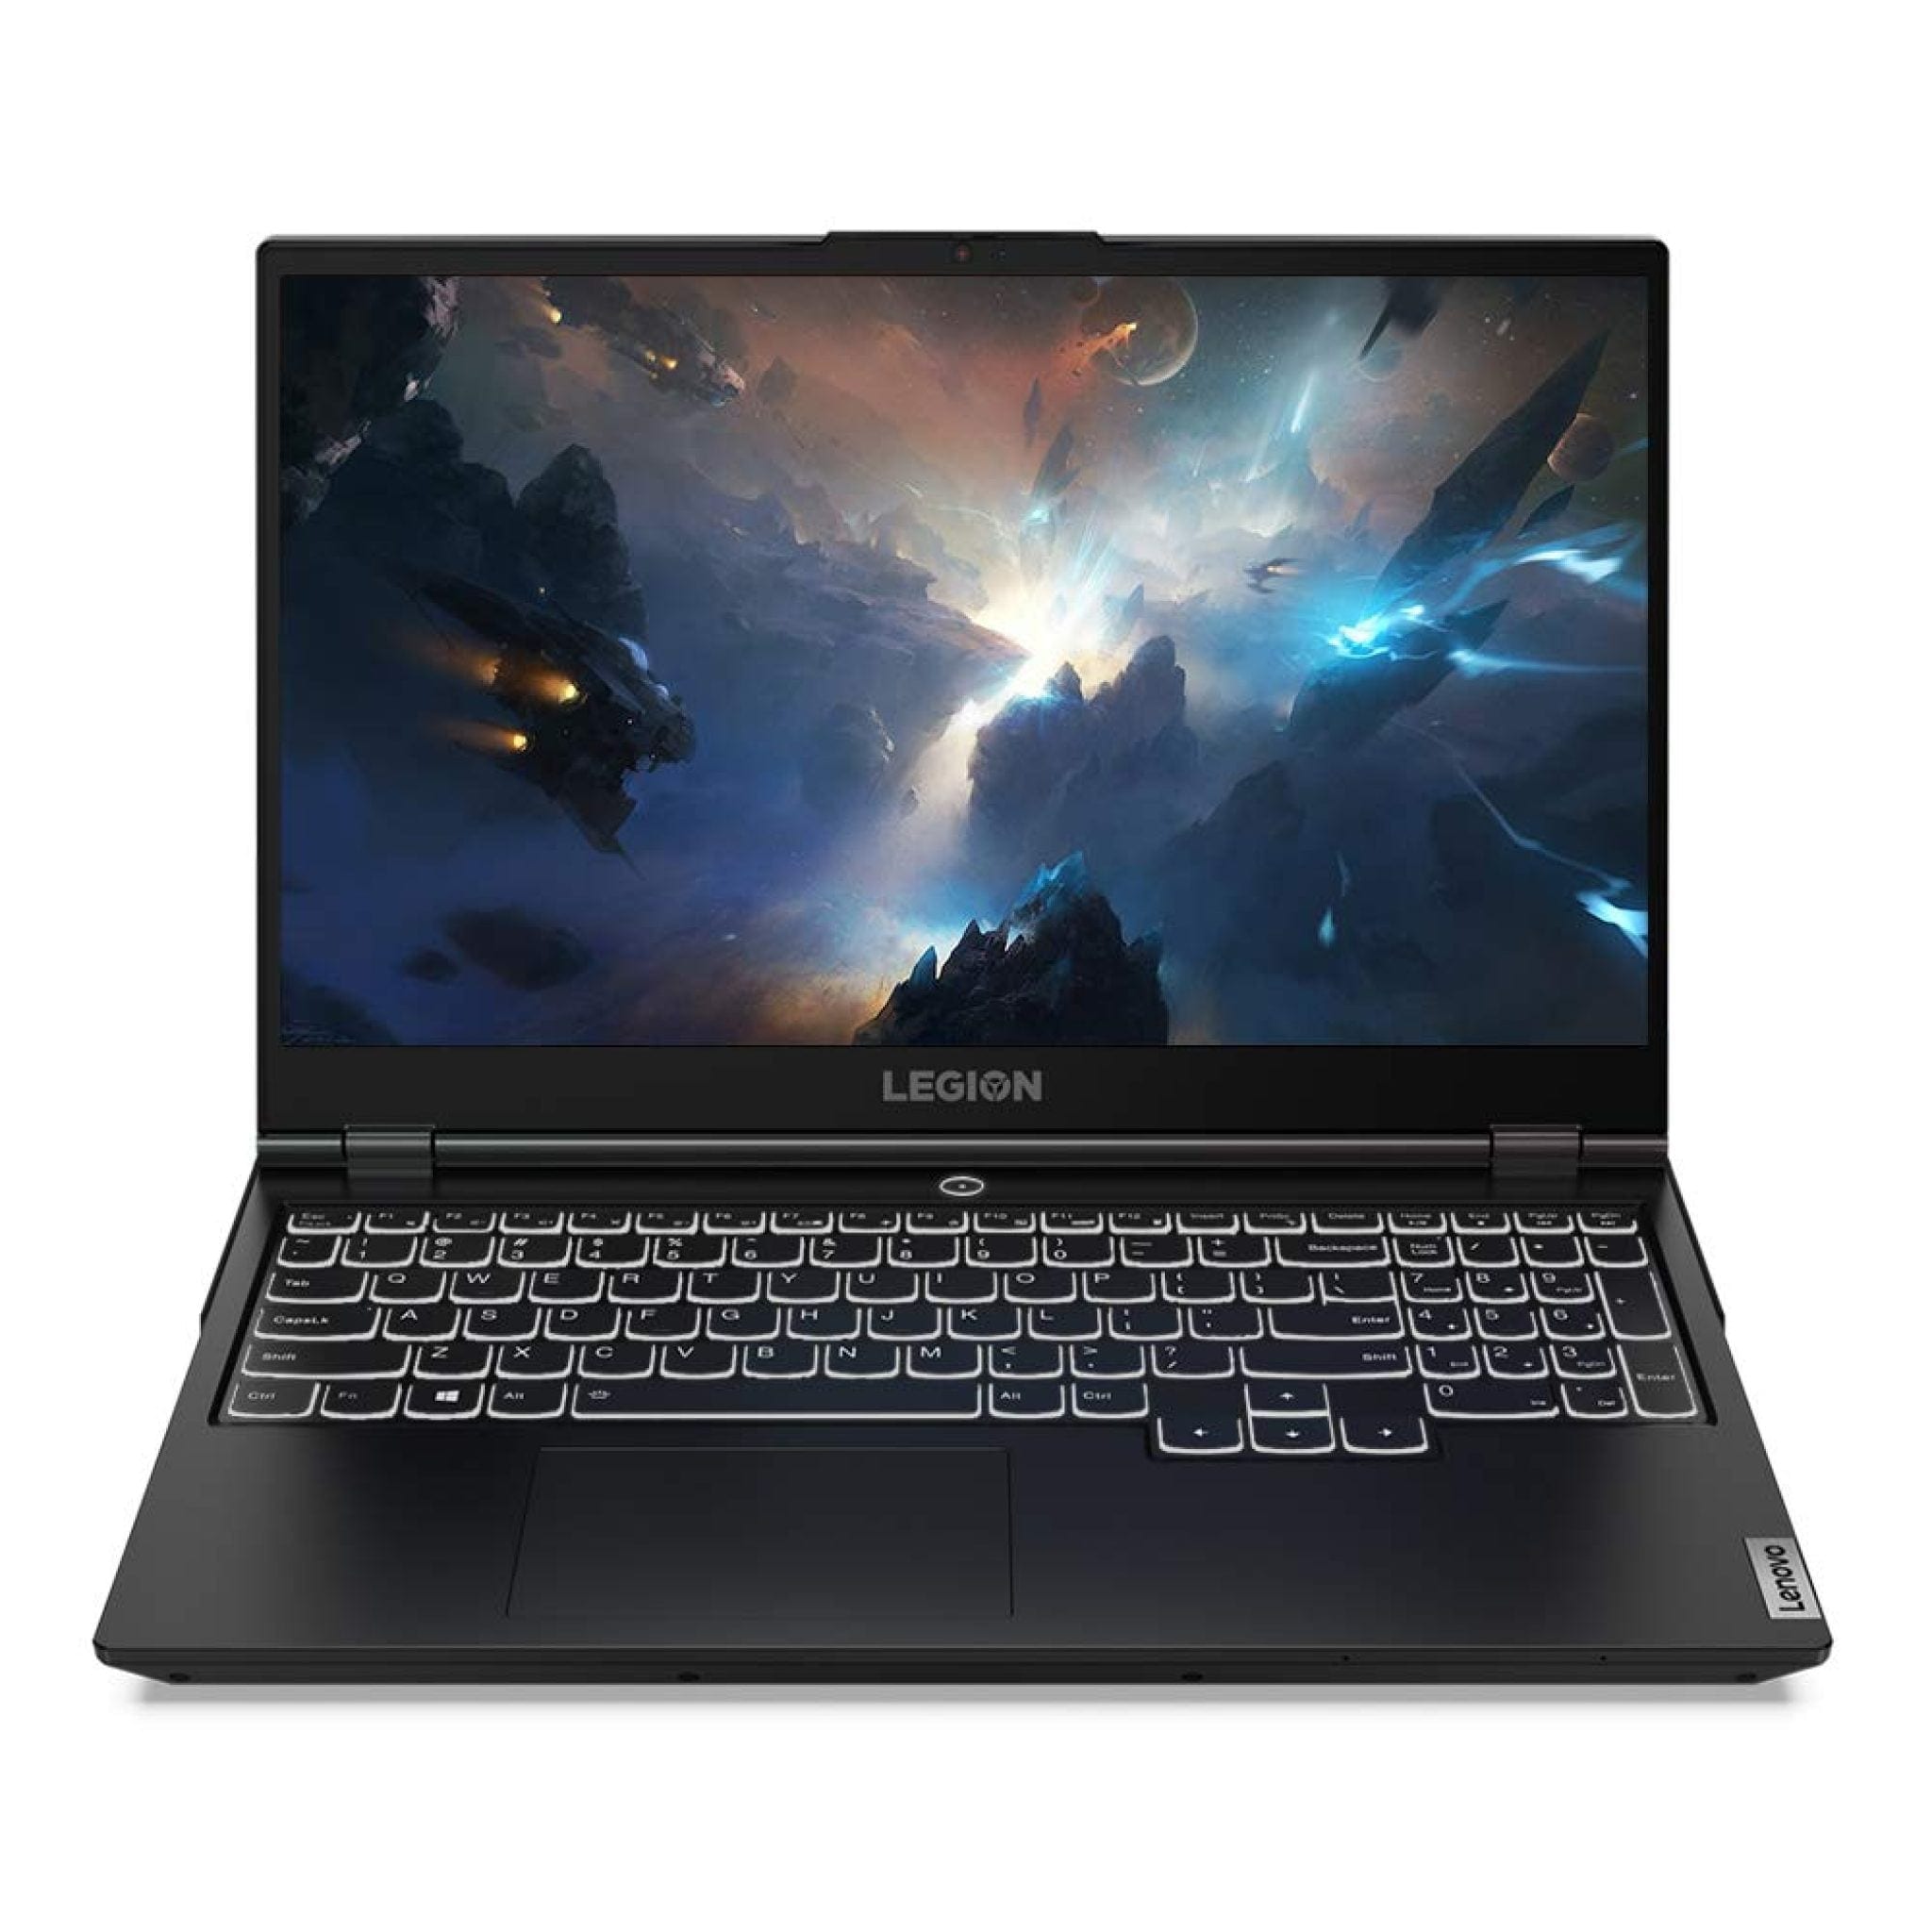 [Top 10] Best Gaming Laptops Under 1 Lakh (Buyer's Review)